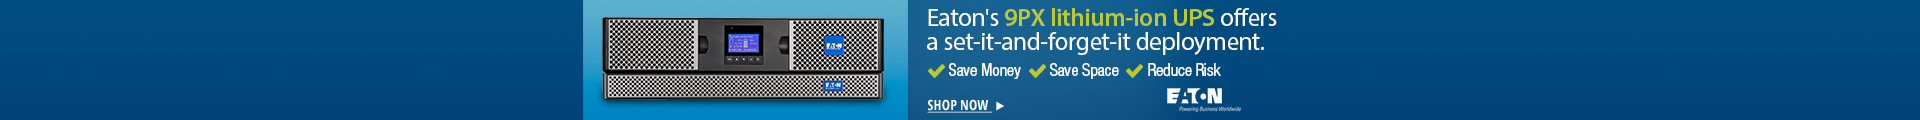 Eaton's 9PX Lithium-lon UPS offers a set-it-and-forget-it deployment